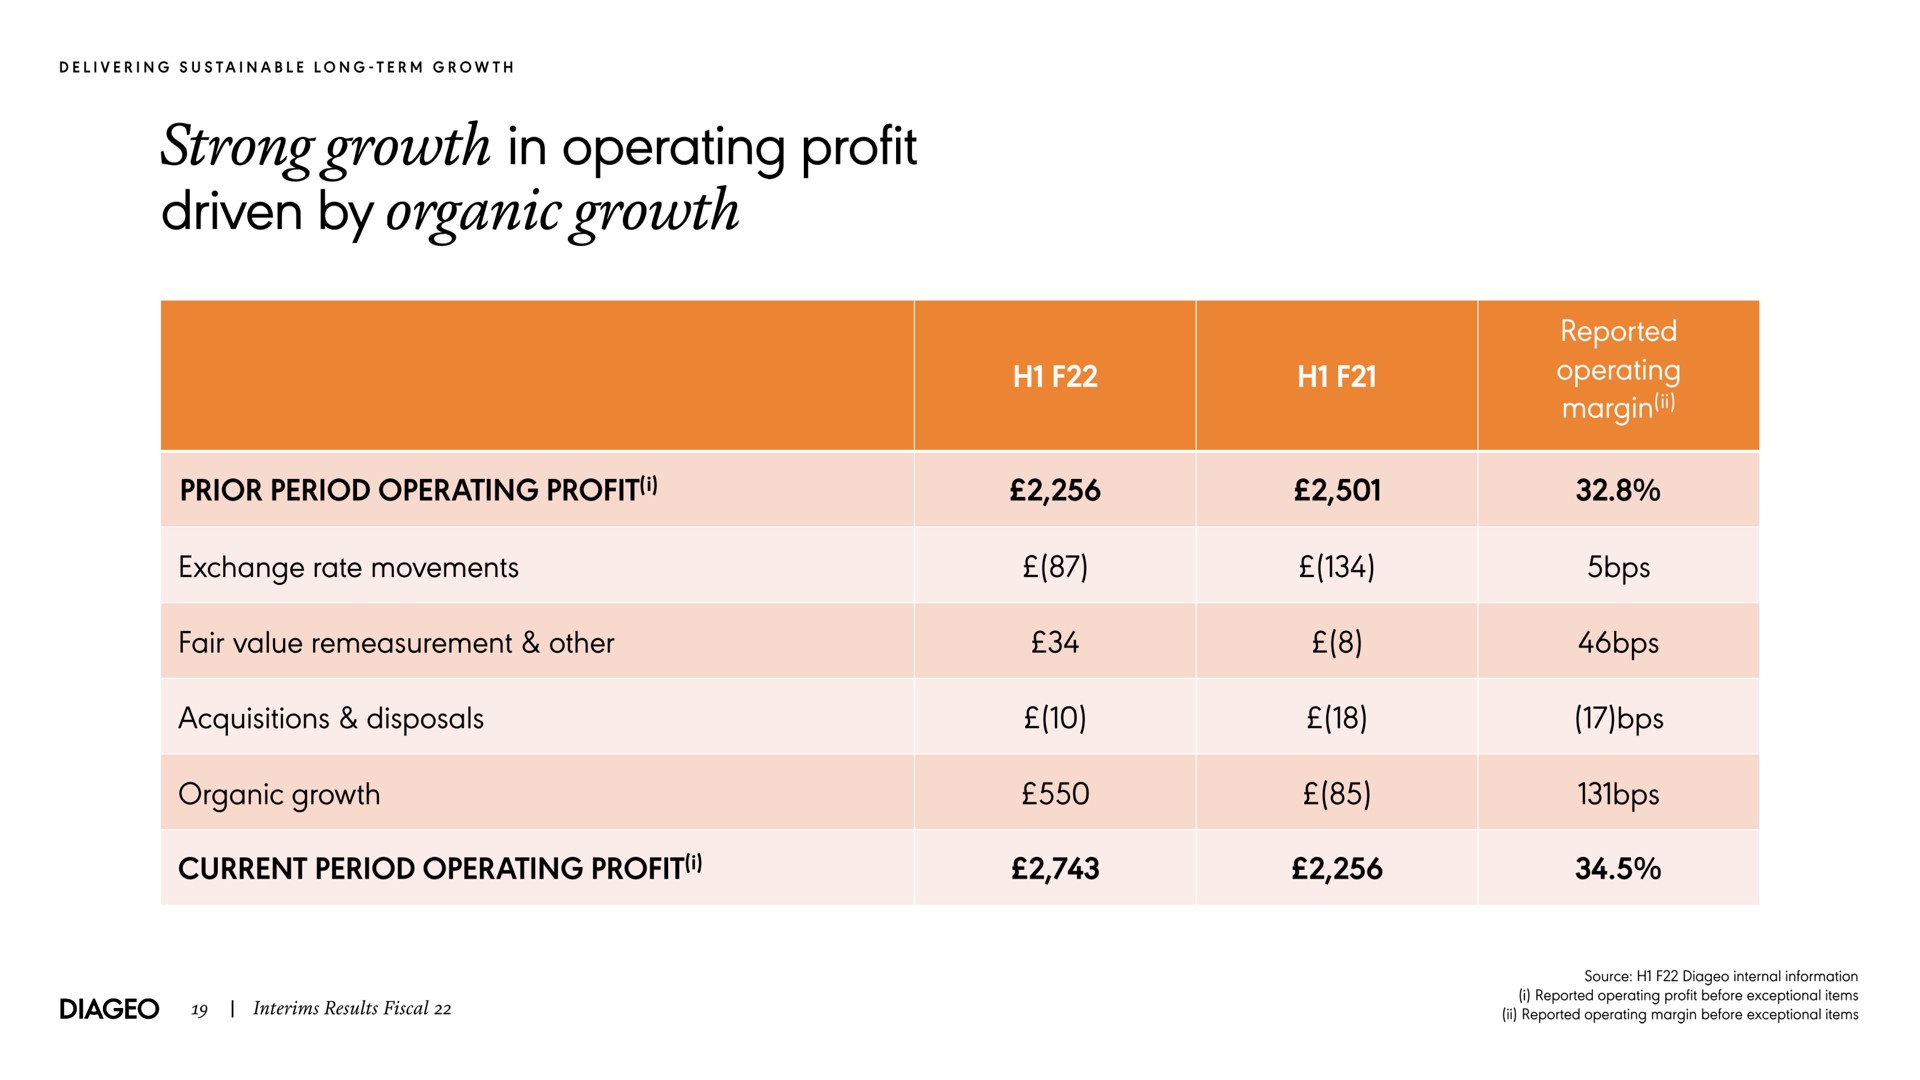 i i strong growth in operating profit driven by organic growth prior period operating profit organic growth | Diageo